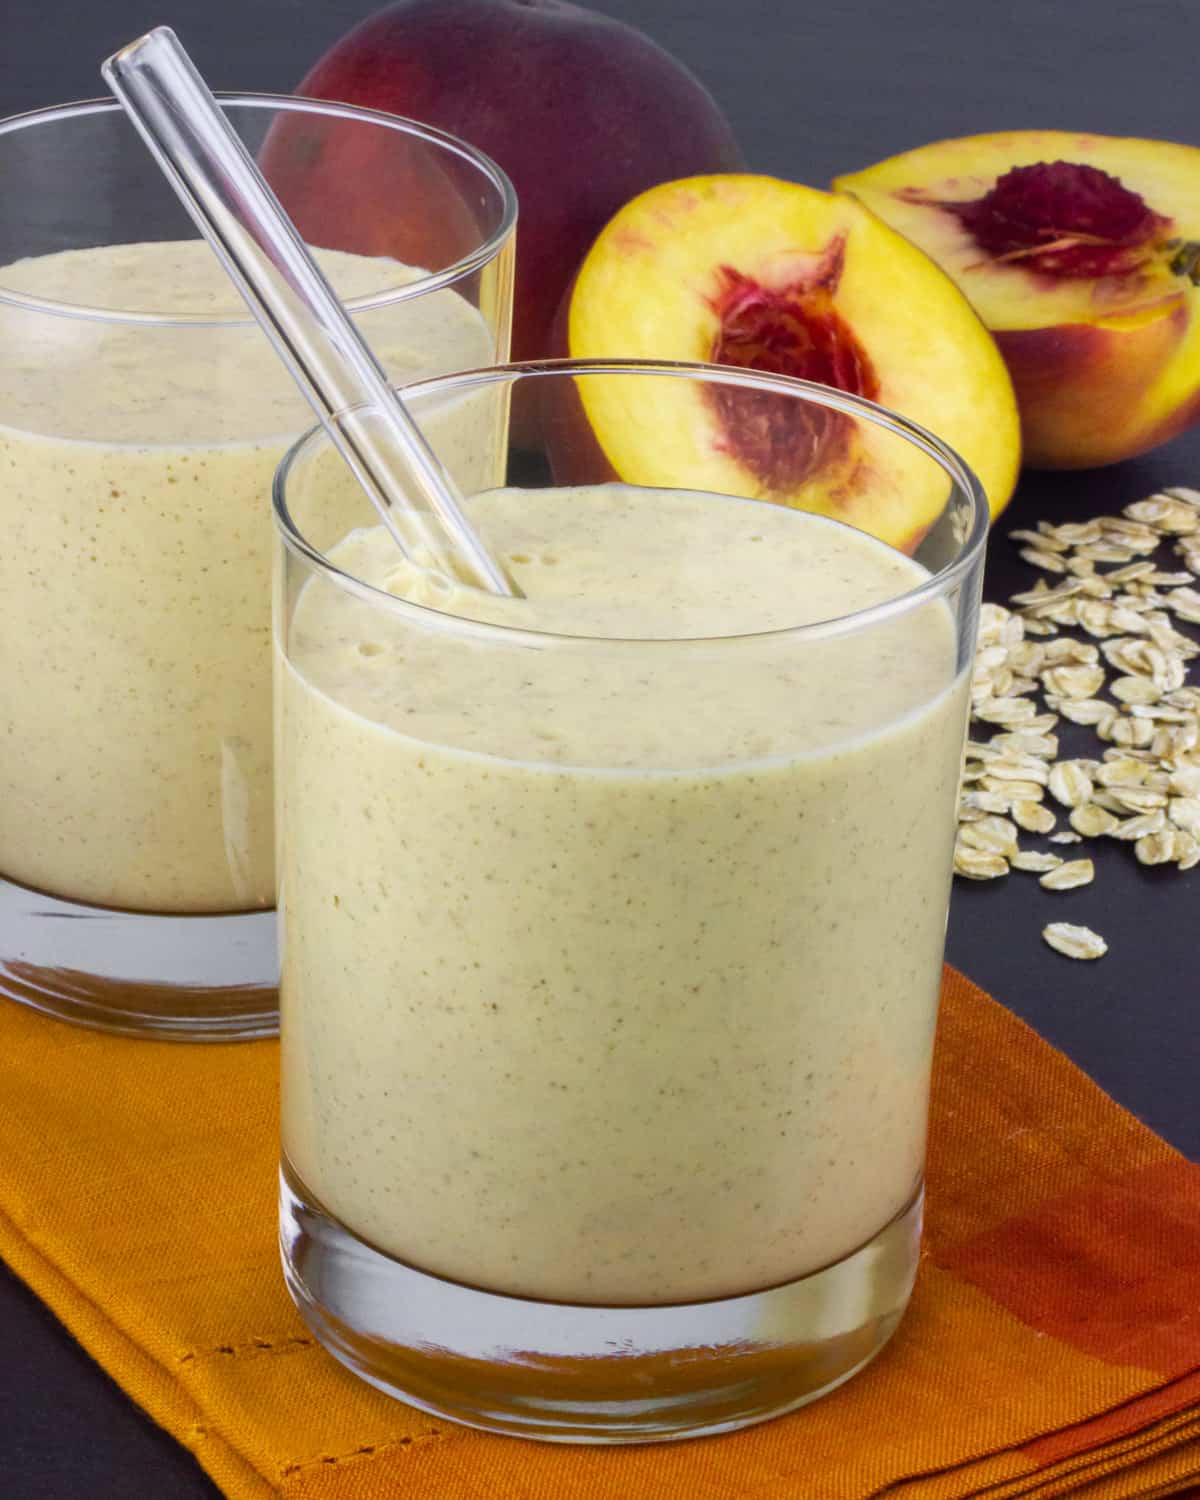 Peaches and a pile of oats behind a glass full of a smoothie.